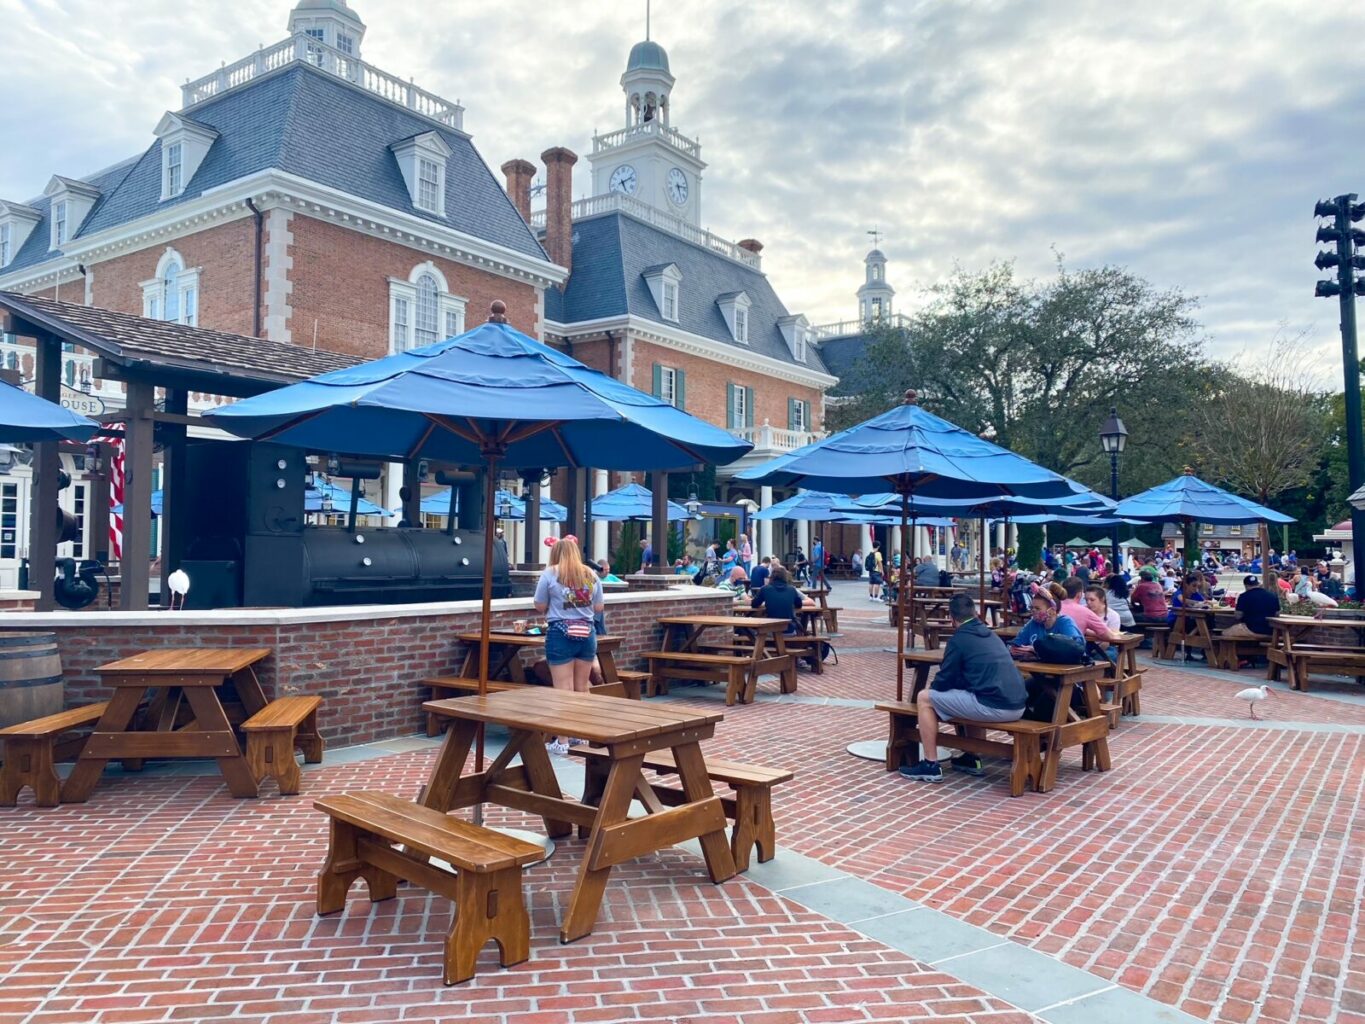 blue umbrellas over picnic tables in front of colonial style brick building 